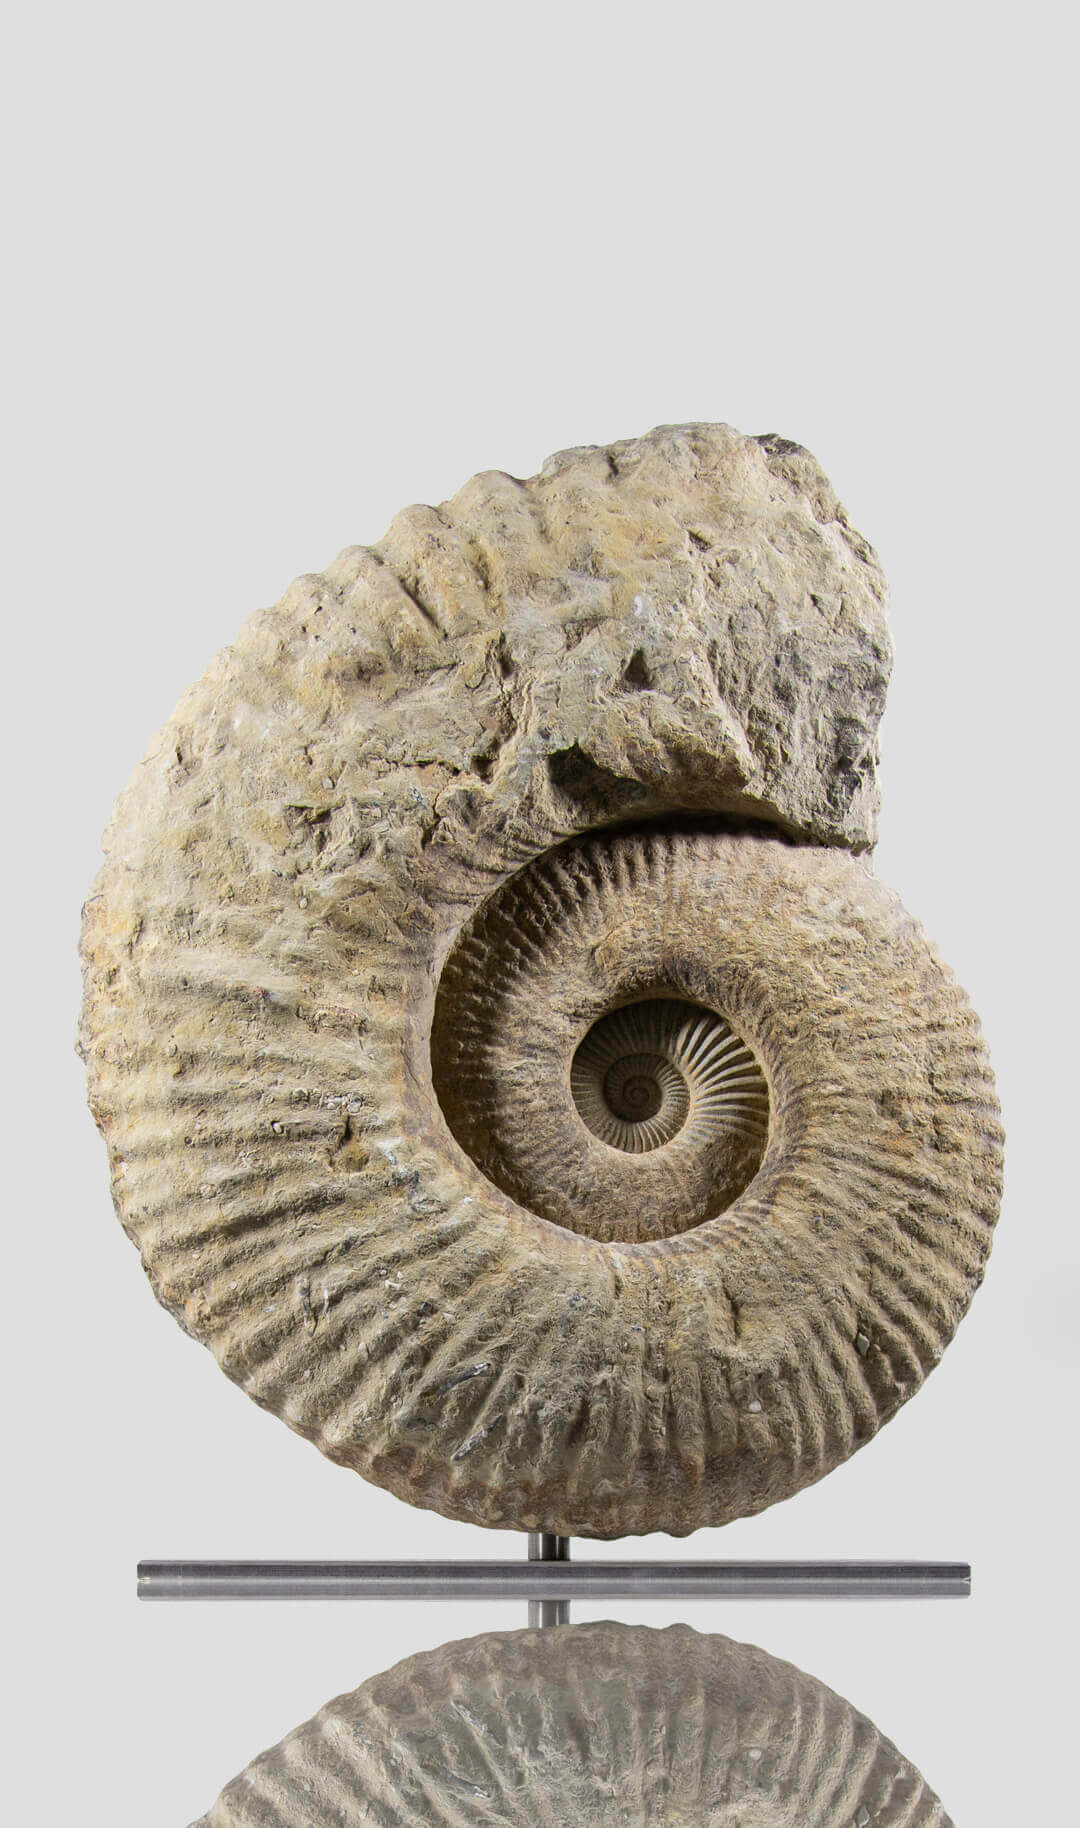 mantelliceras ammonite for sale on stainless steel swivel stand 06